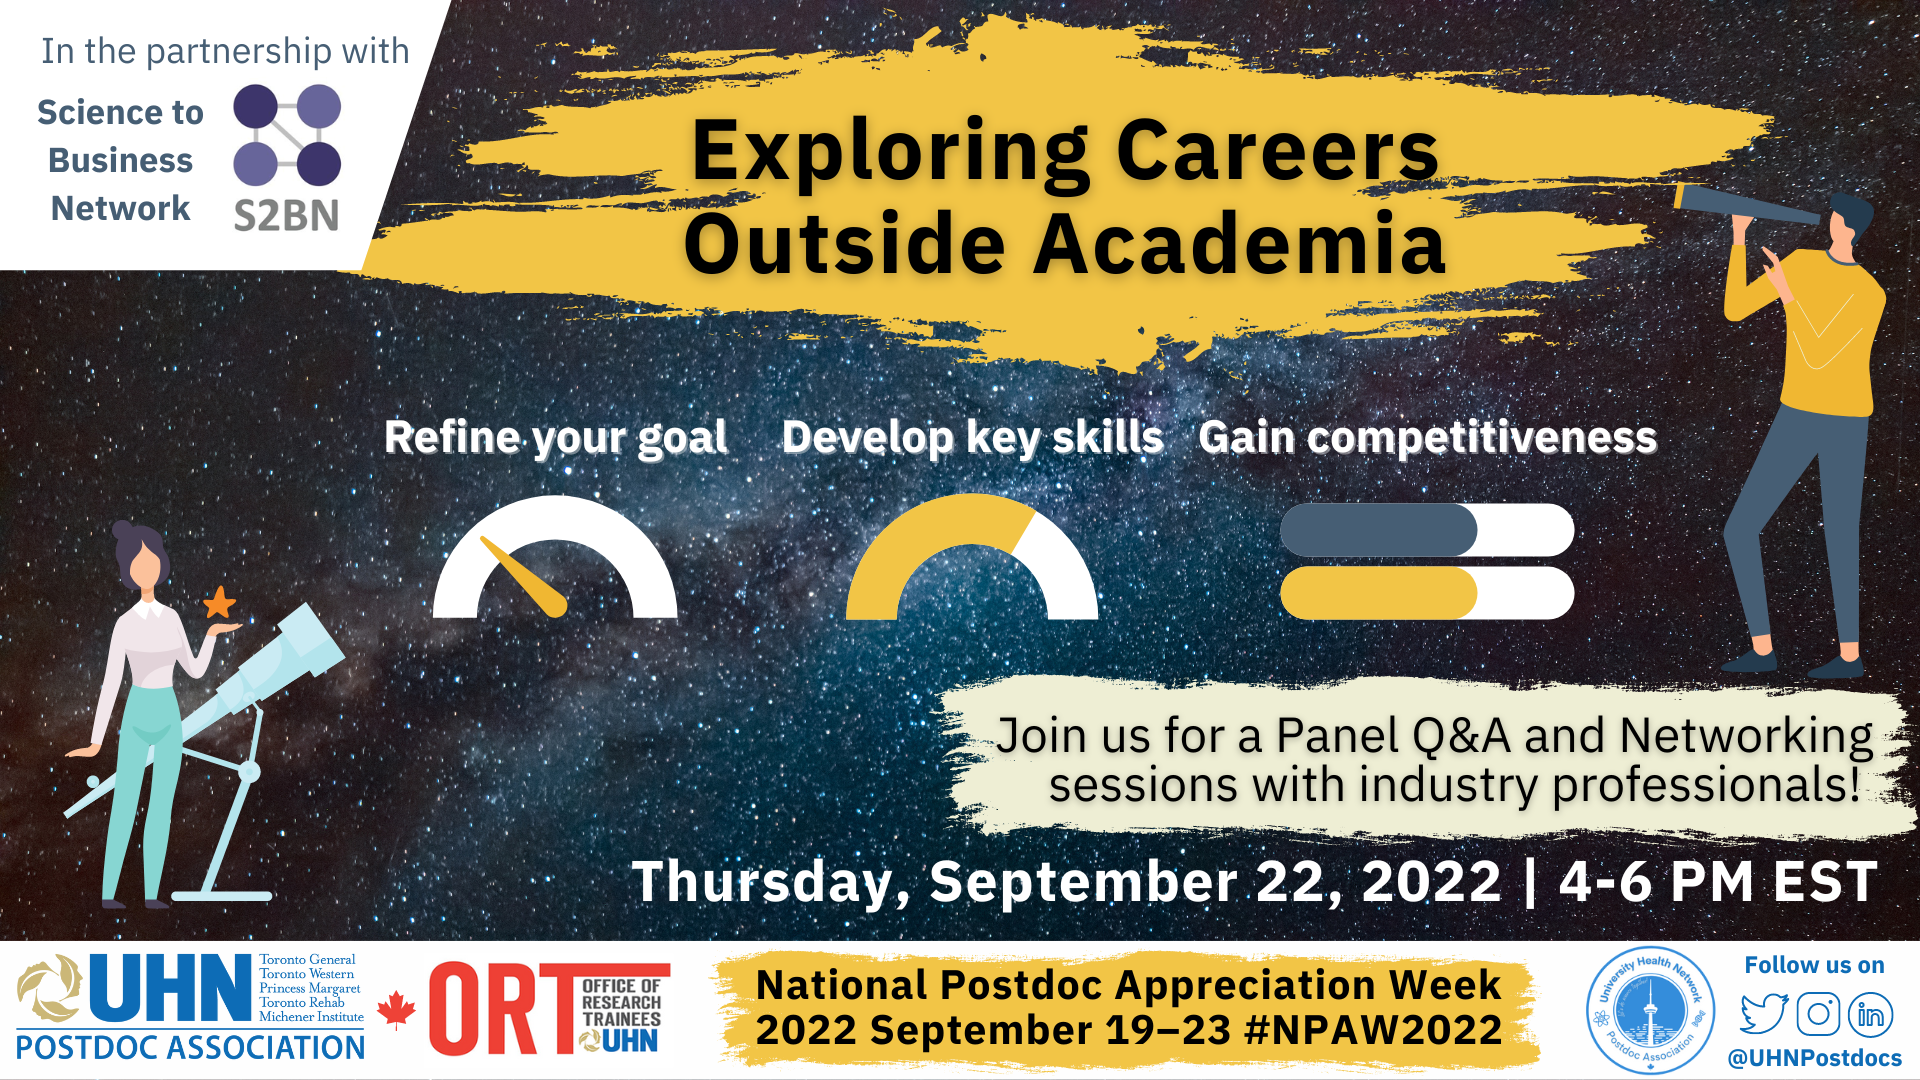 Poster for Day 4 of postdoc appreciation week. At the bottom is a banner with the UHN Postdoc Association logo, the ORT logo, National Postdoc Appreciation Week, 2022 September 19-23. #NPAW2022 and the details for how to follow the UHNPA on Twitter, Instagram and LinkedIn. The poster reads Exploring Careers Outside of Academia. In partnership with Science to Business Network. Join for a Panel Q&A and Networking Session with industry professionals. Thursday September 22, 2022. 4-6 pm